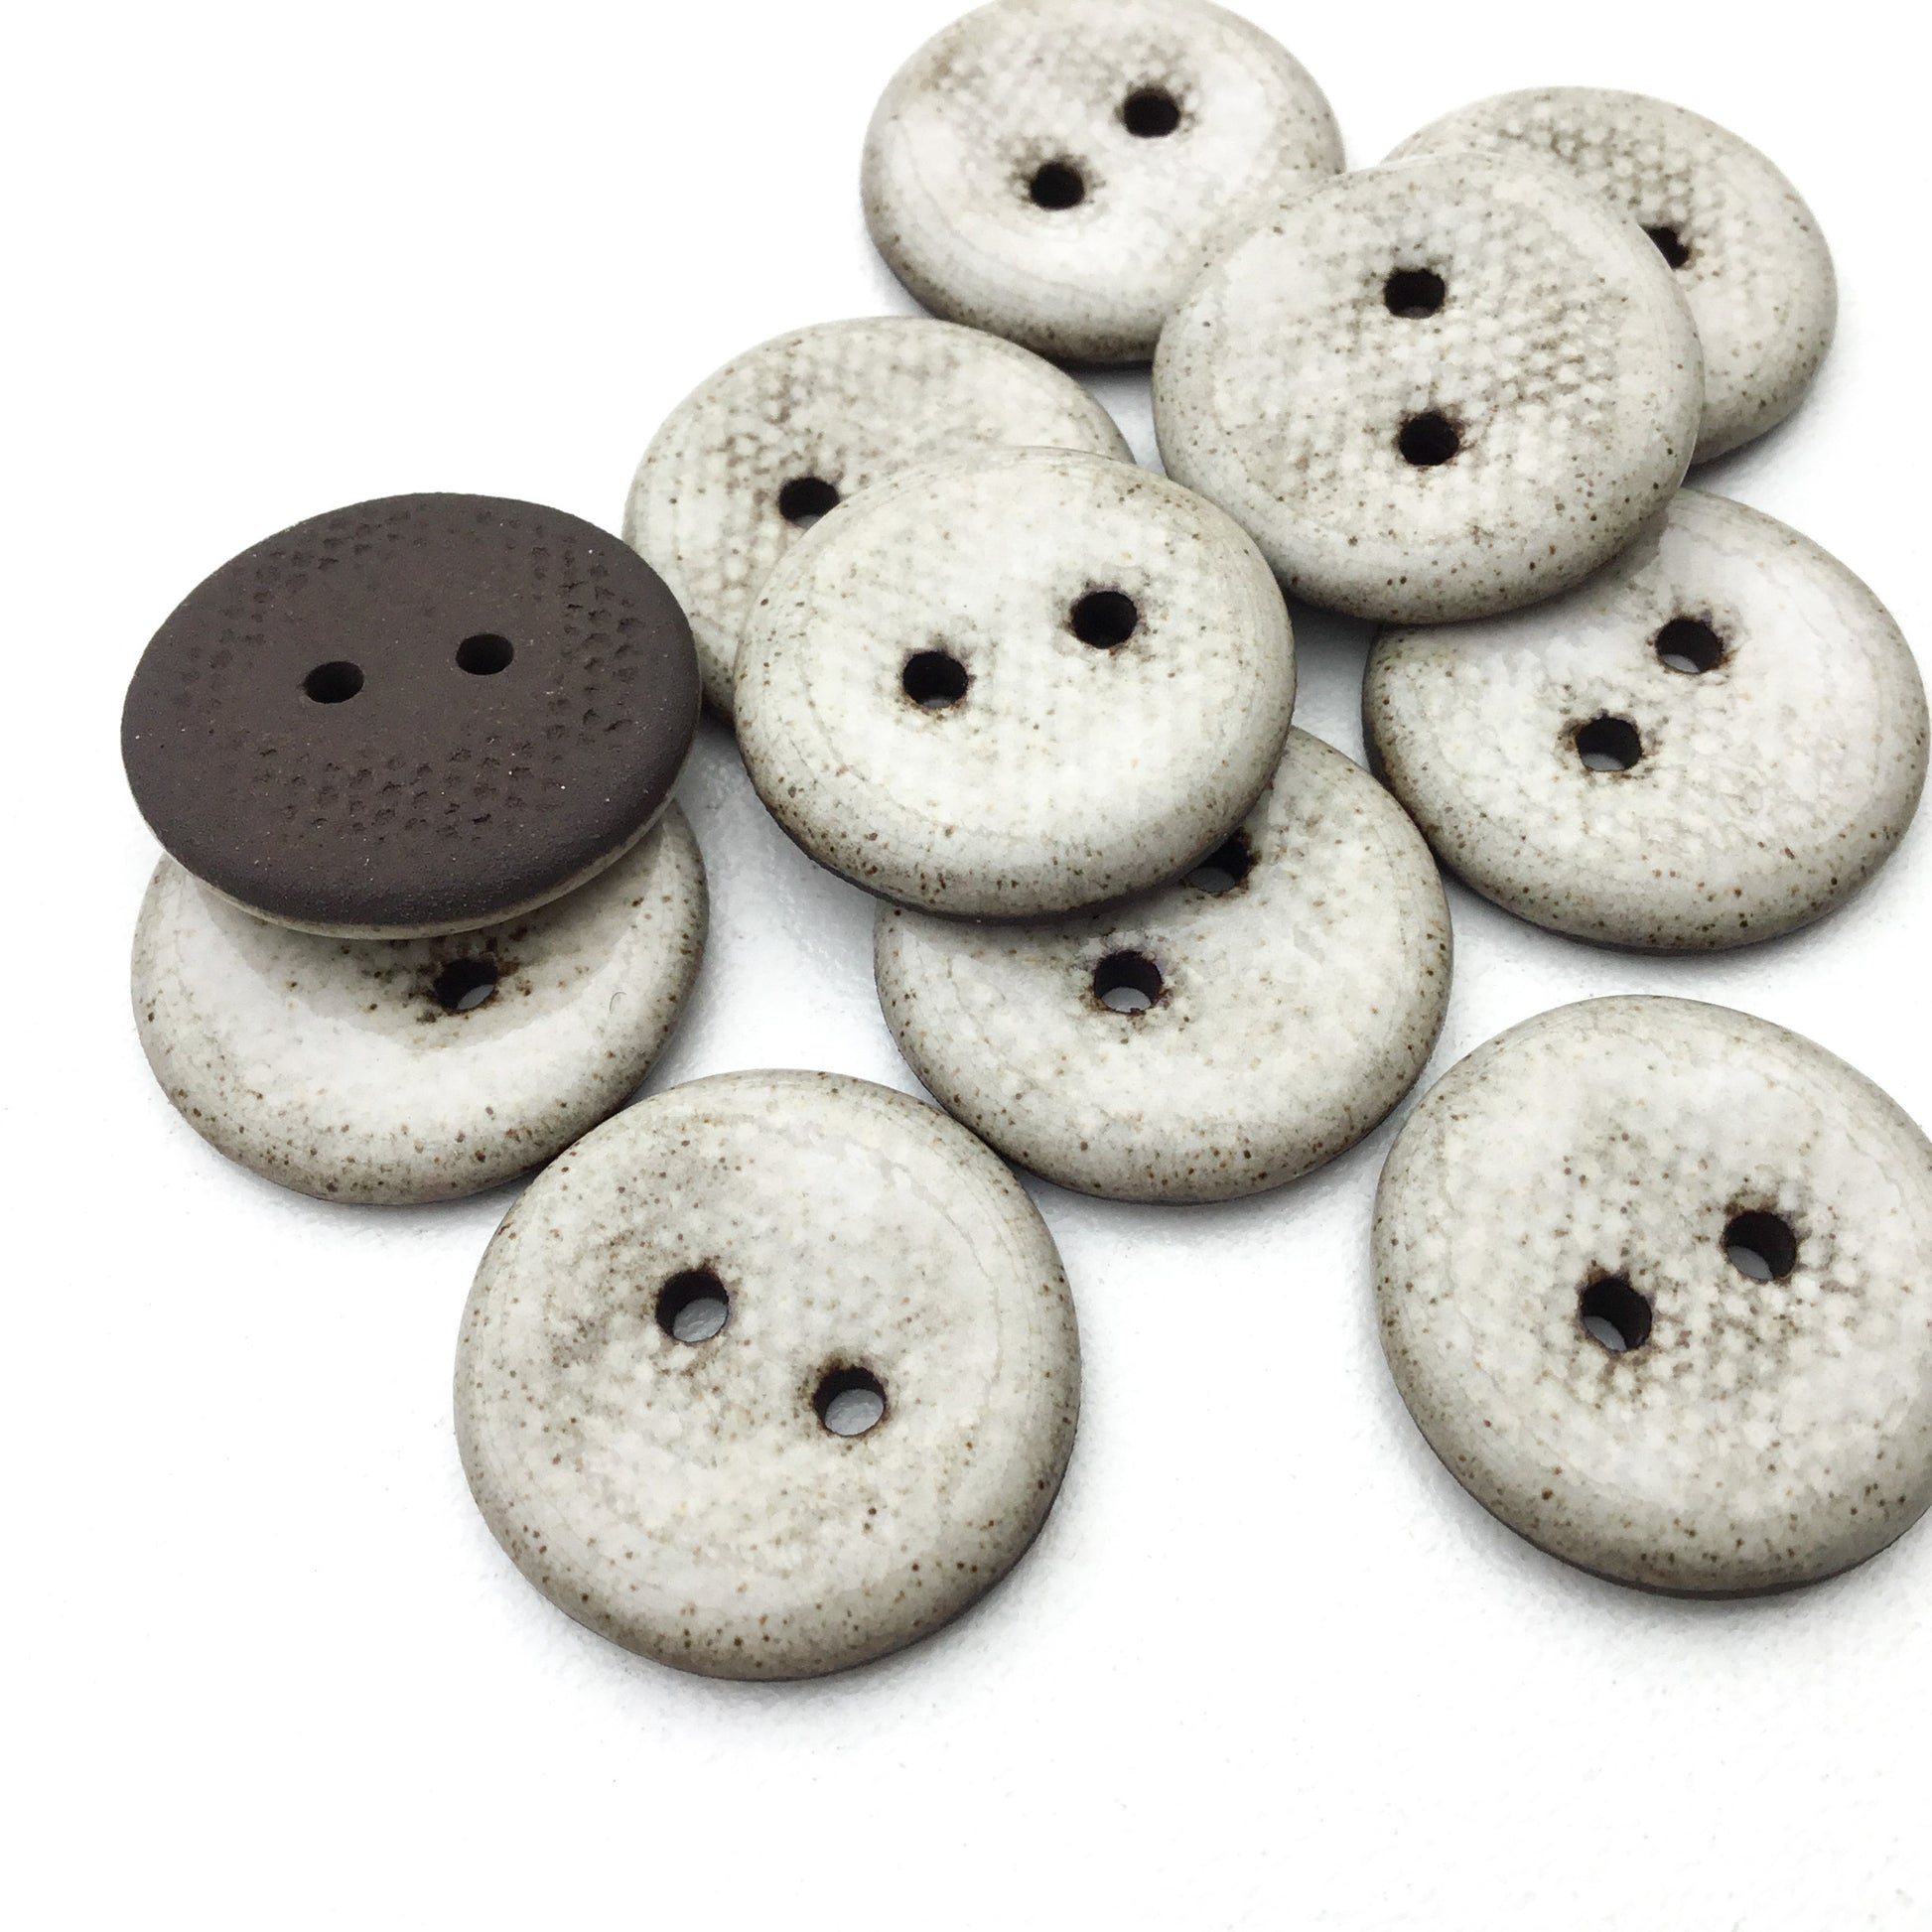 Large Buttons Handcrafted, Clay Big Buttons 1 1/4 Inch Buttons No. 271 